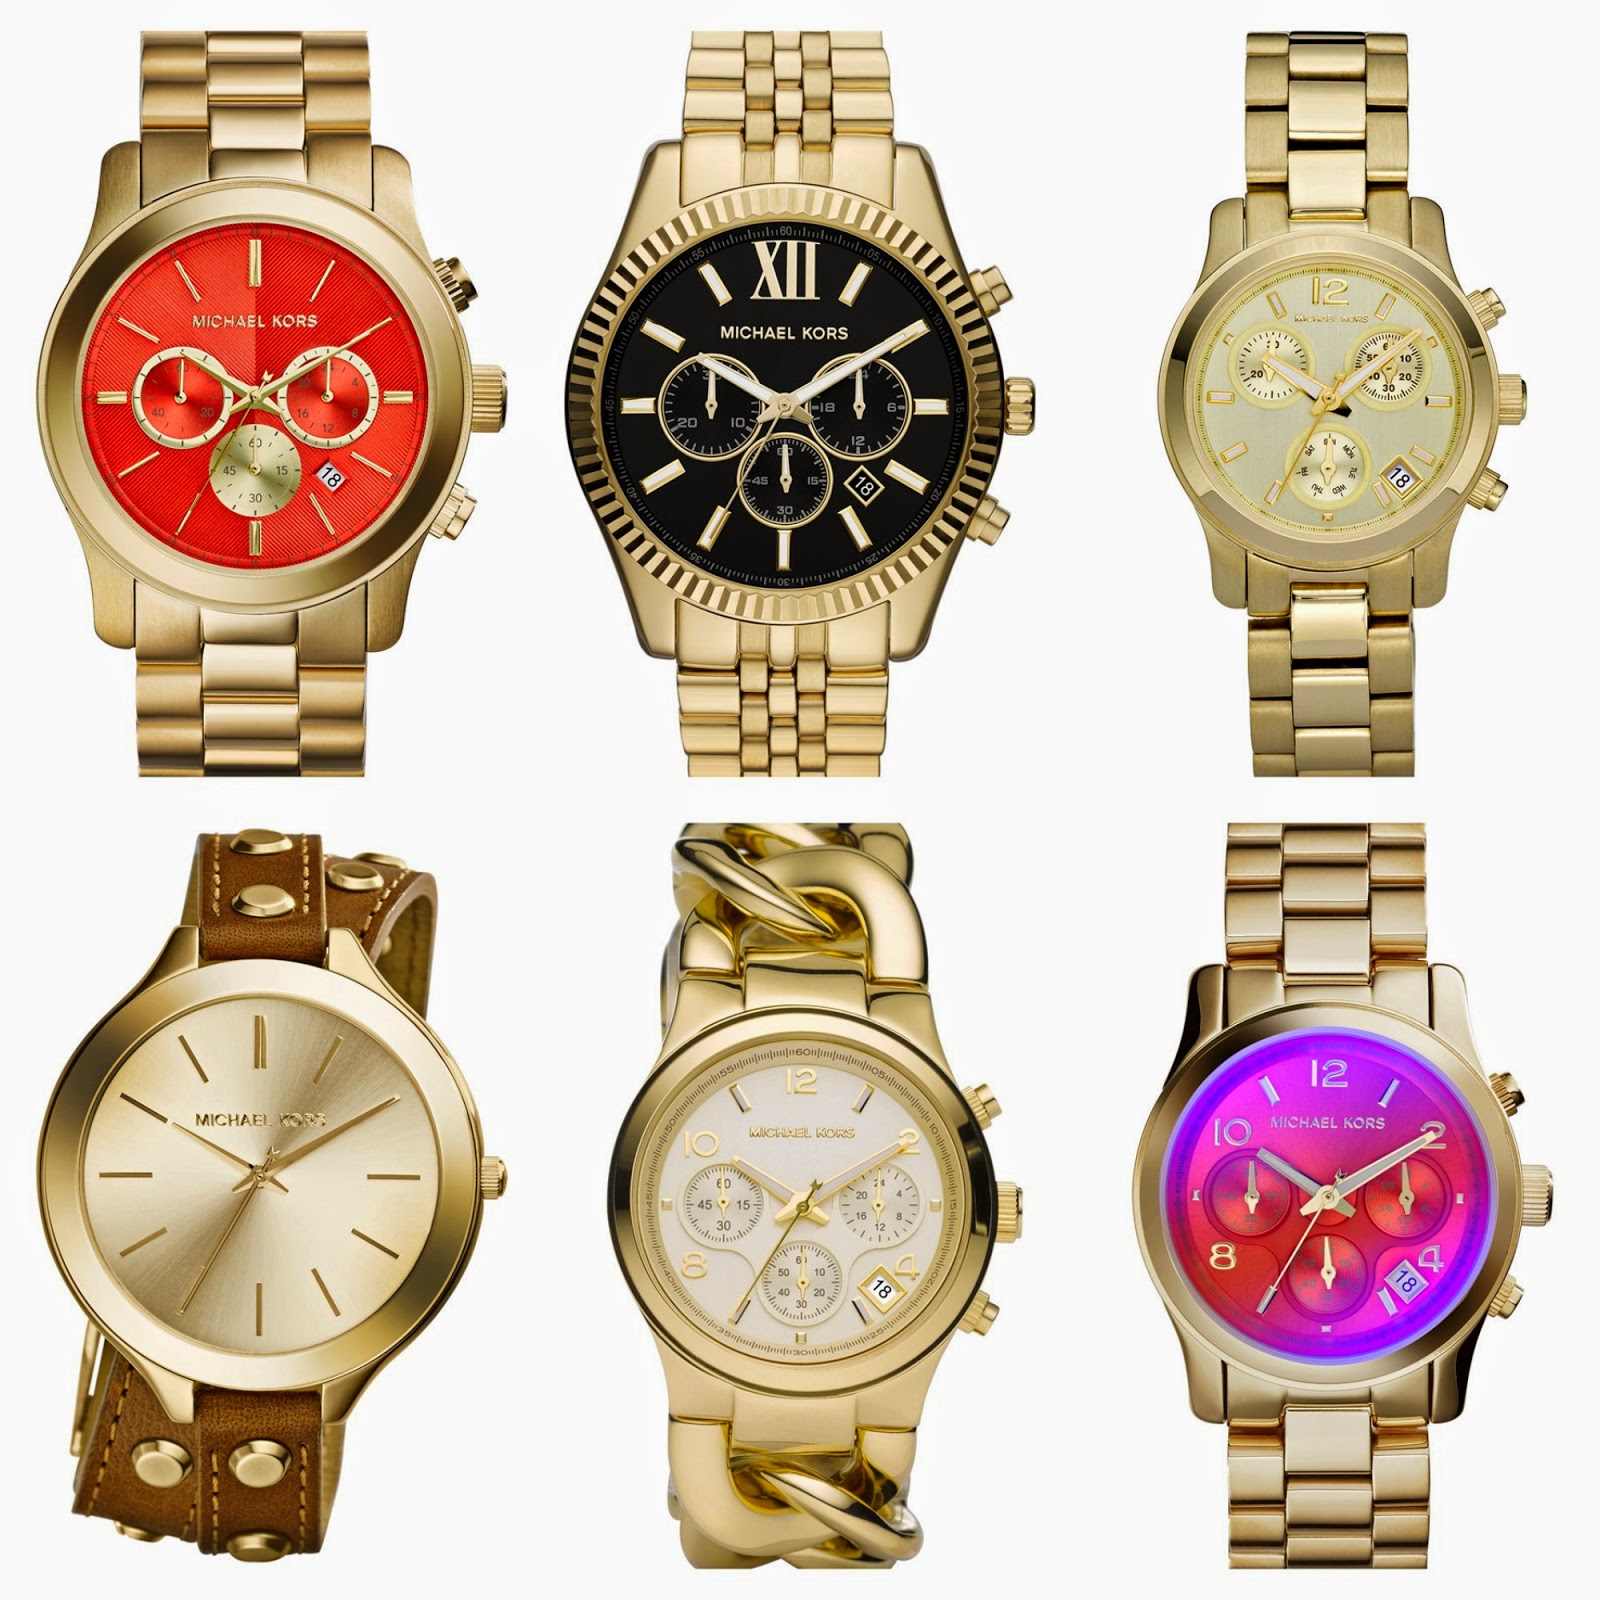 THE BEST MICHAEL KORS WATCHES, JEWELRY & SHOES